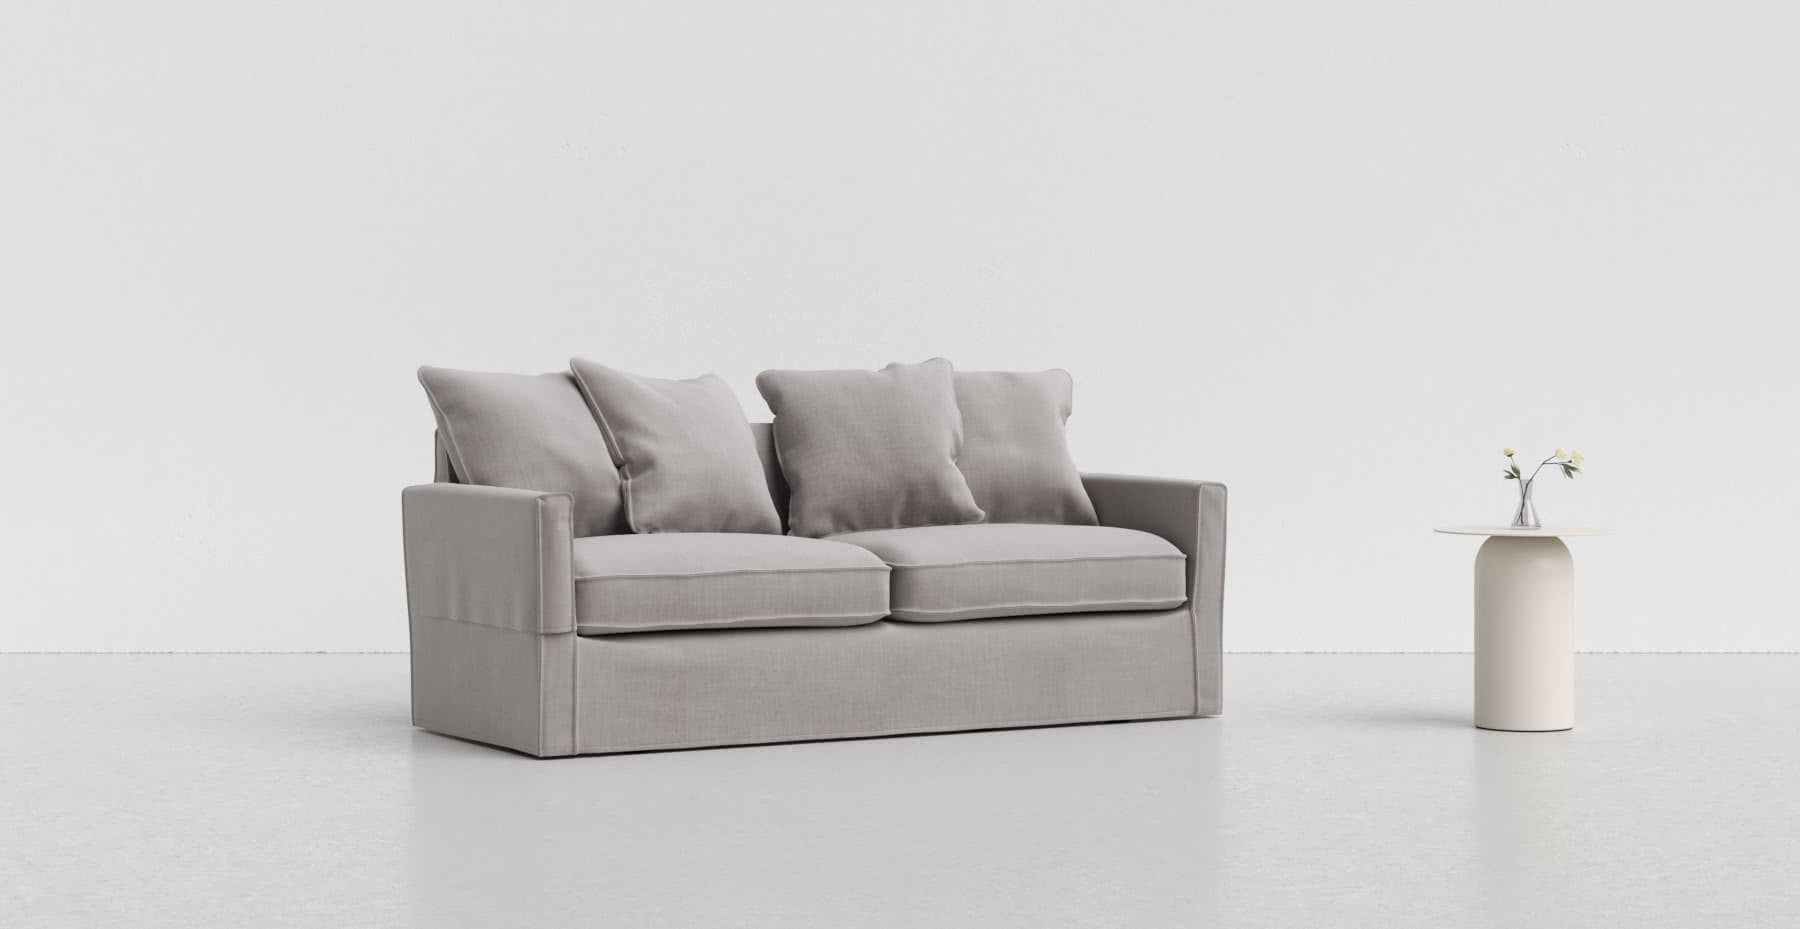 A medium grey Harnosand sofa on a lighter grey background with a white vase beside it